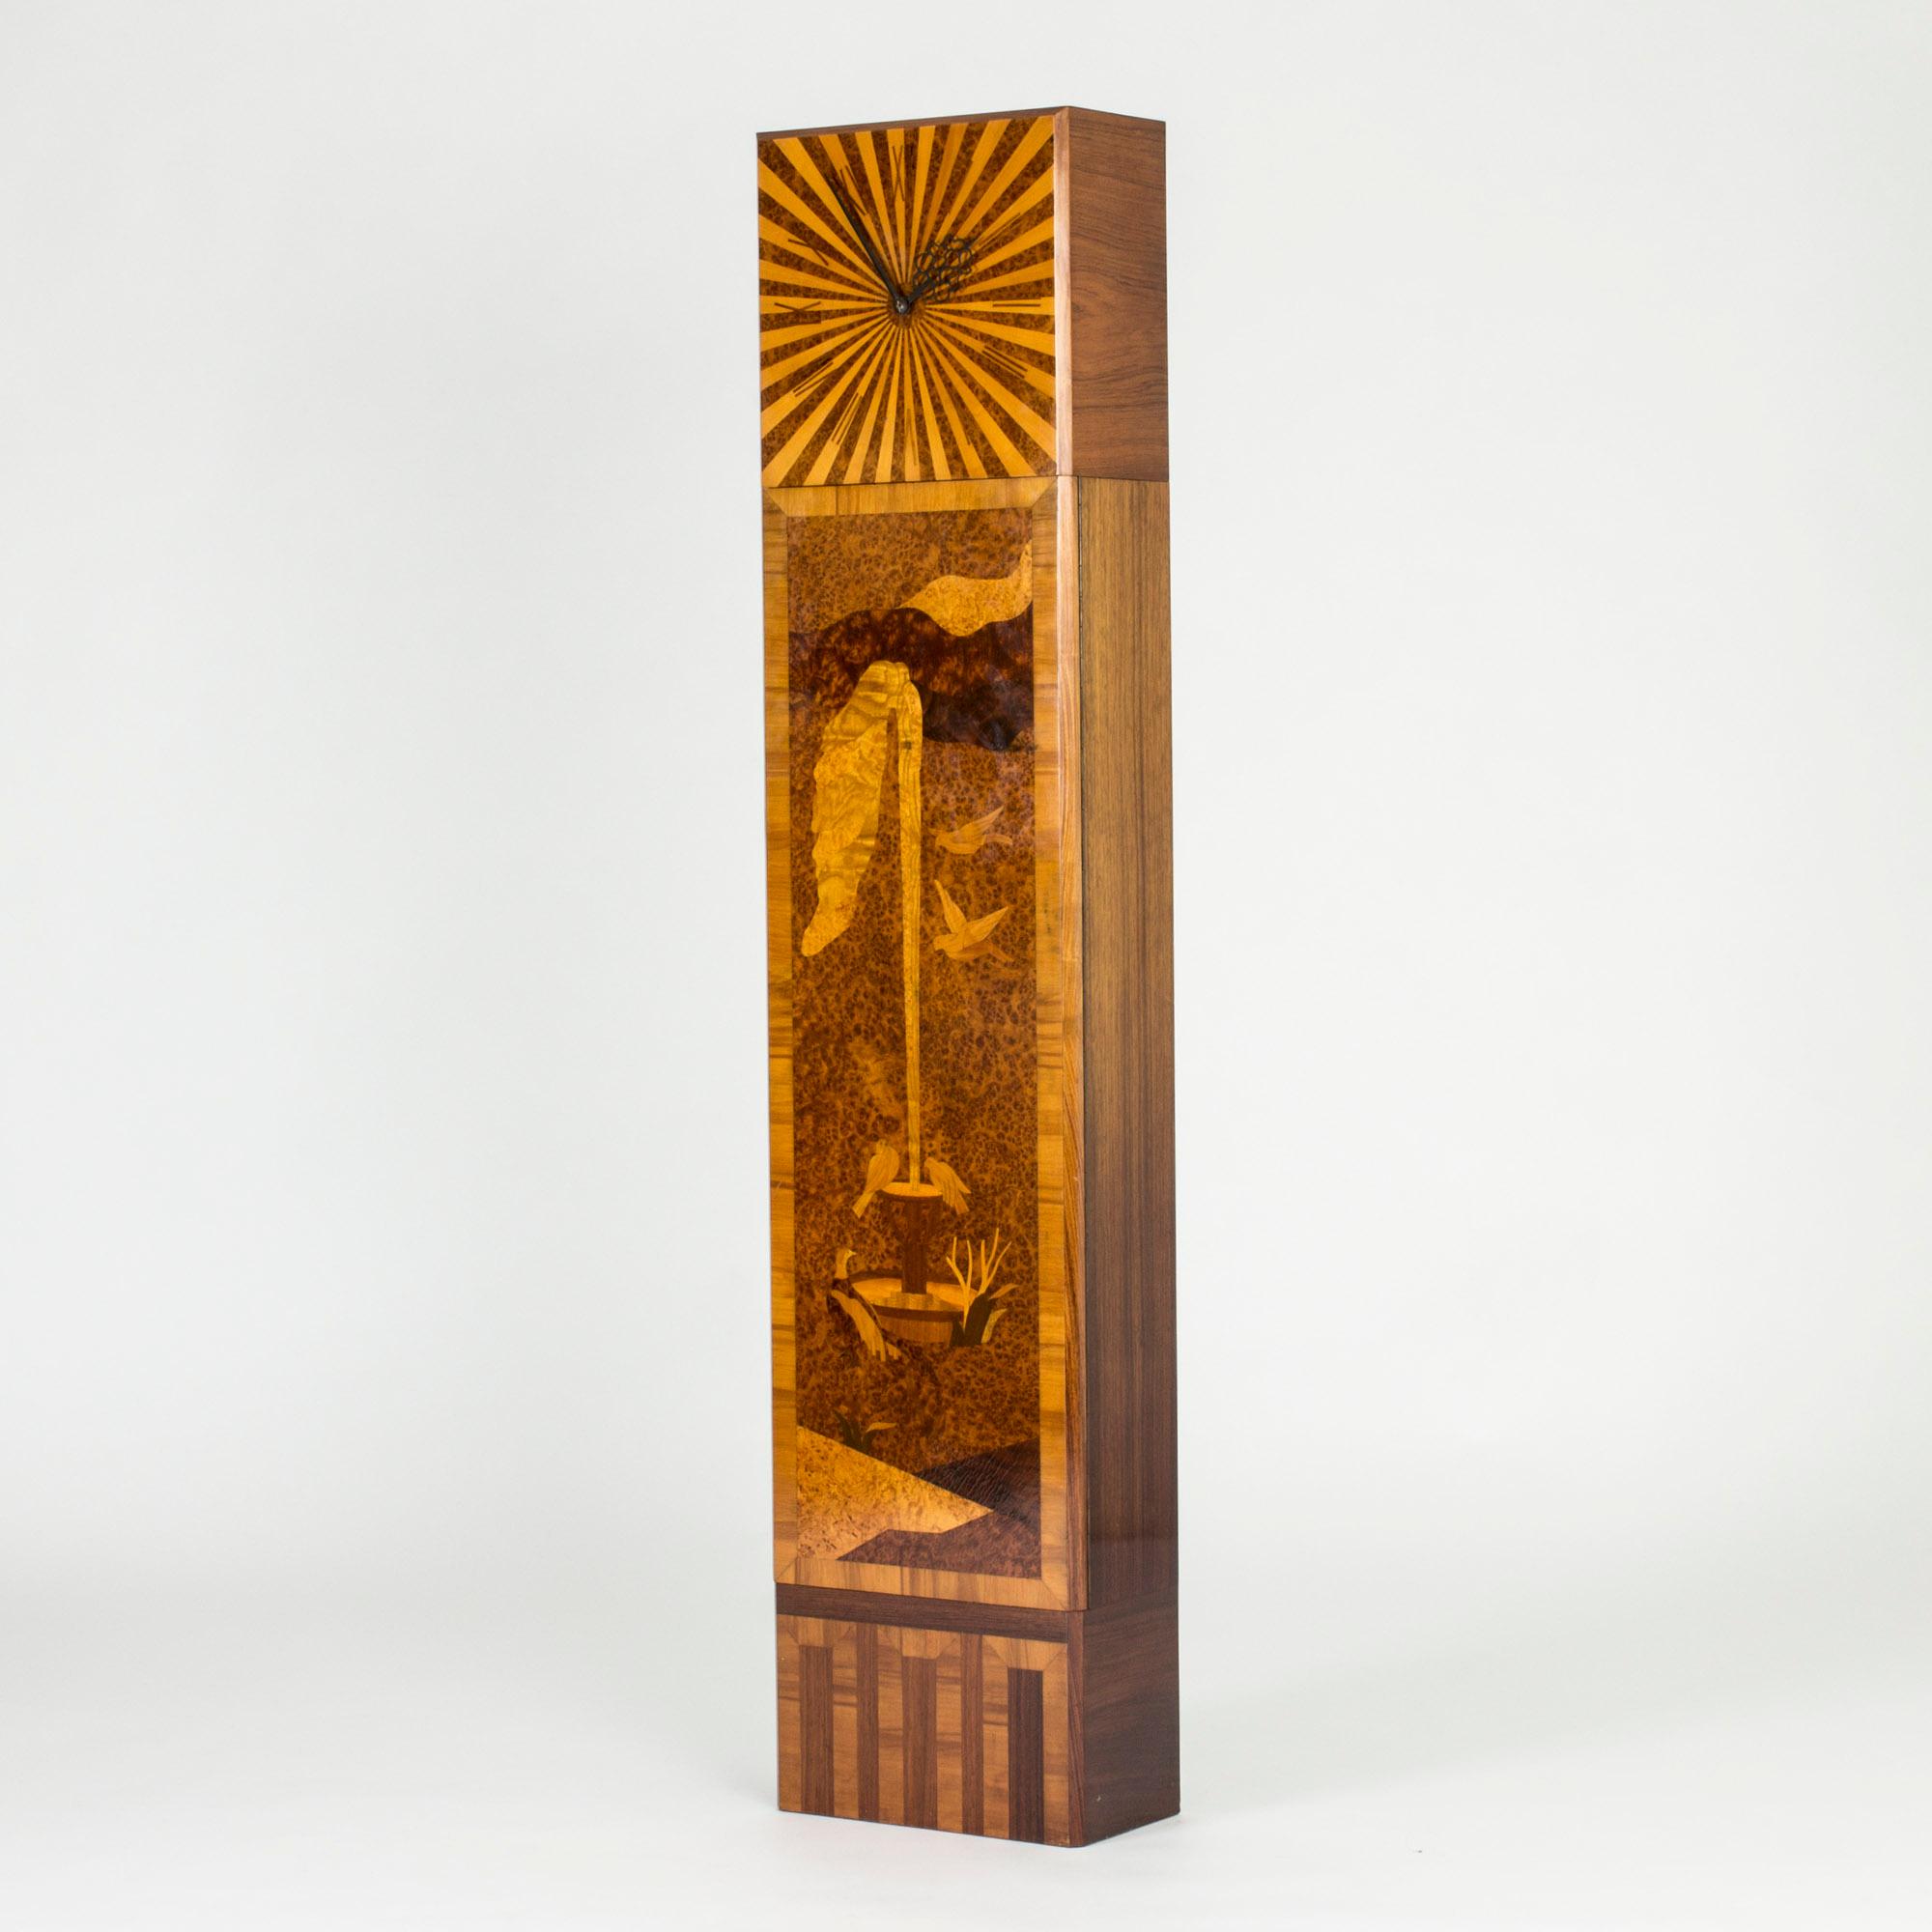 Striking 1930s floor clock from Mjölby Intarsia. Sleek, clean design and a beautiful inlayed motif of birds around a fountain. Beams spread out from behind the clockwork. The wood on the sides is layed with wood grain in contrasting directions.